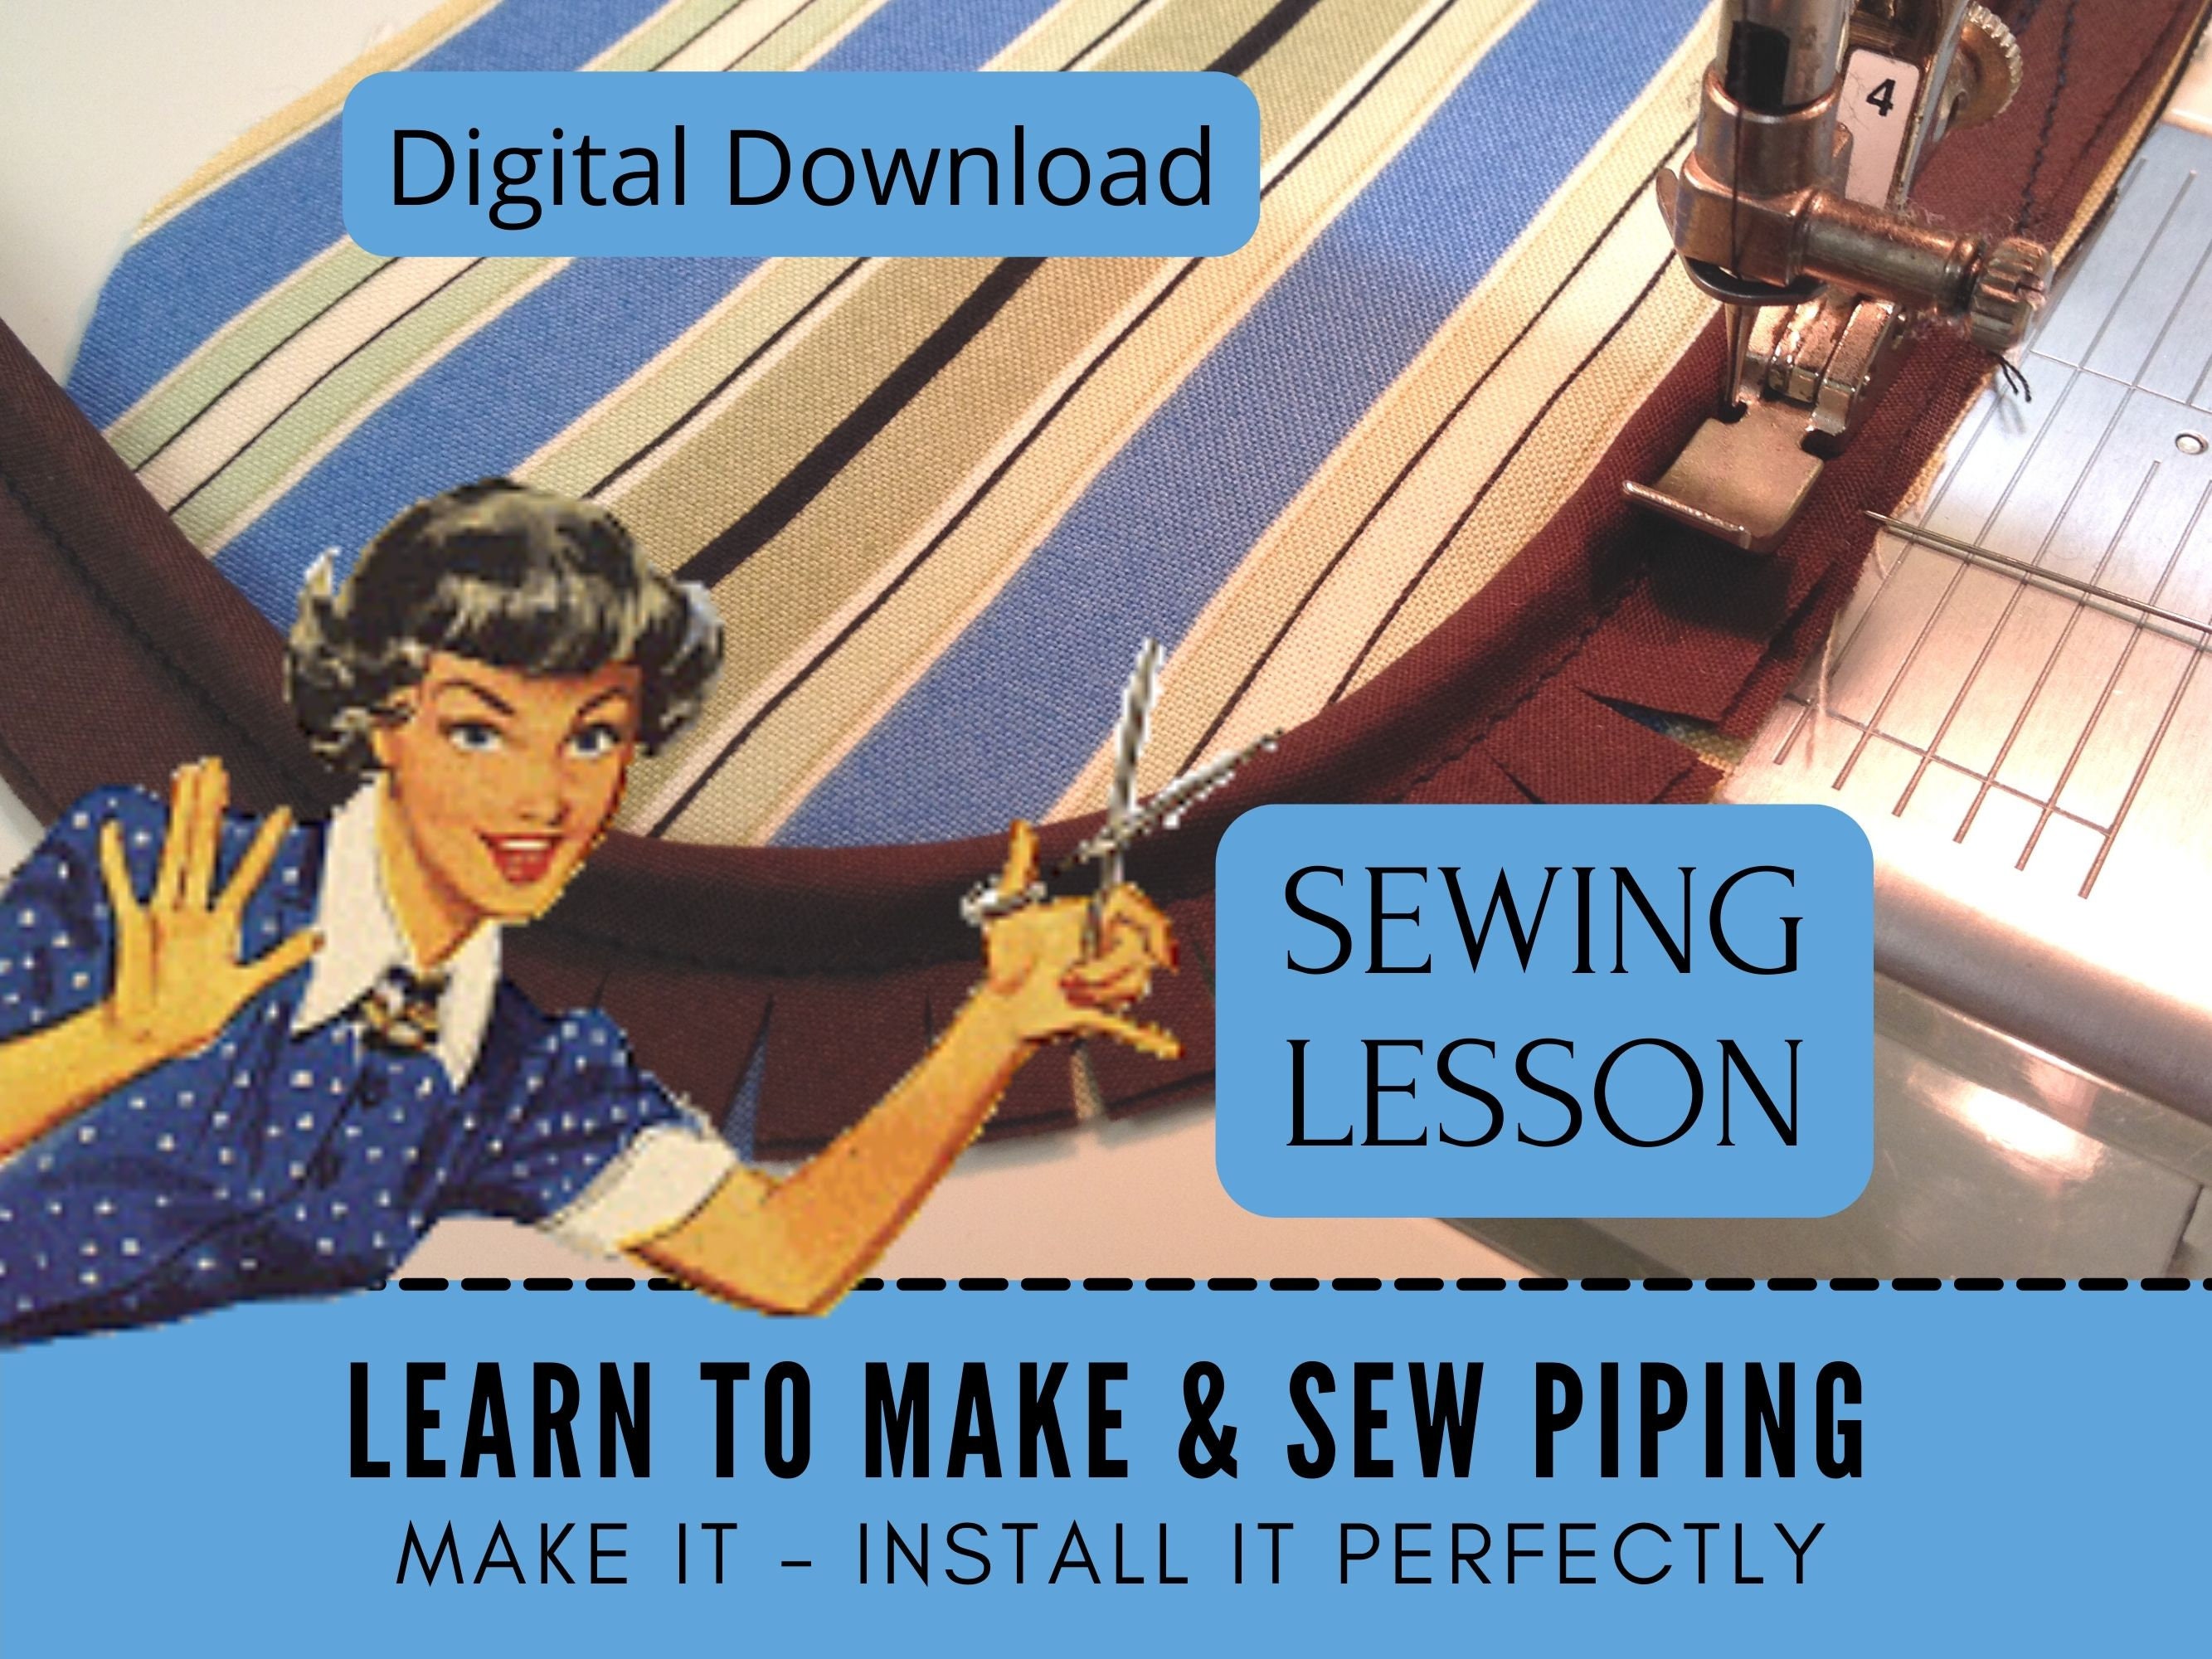 Sewing Lessons: How to Make & Sew Piping